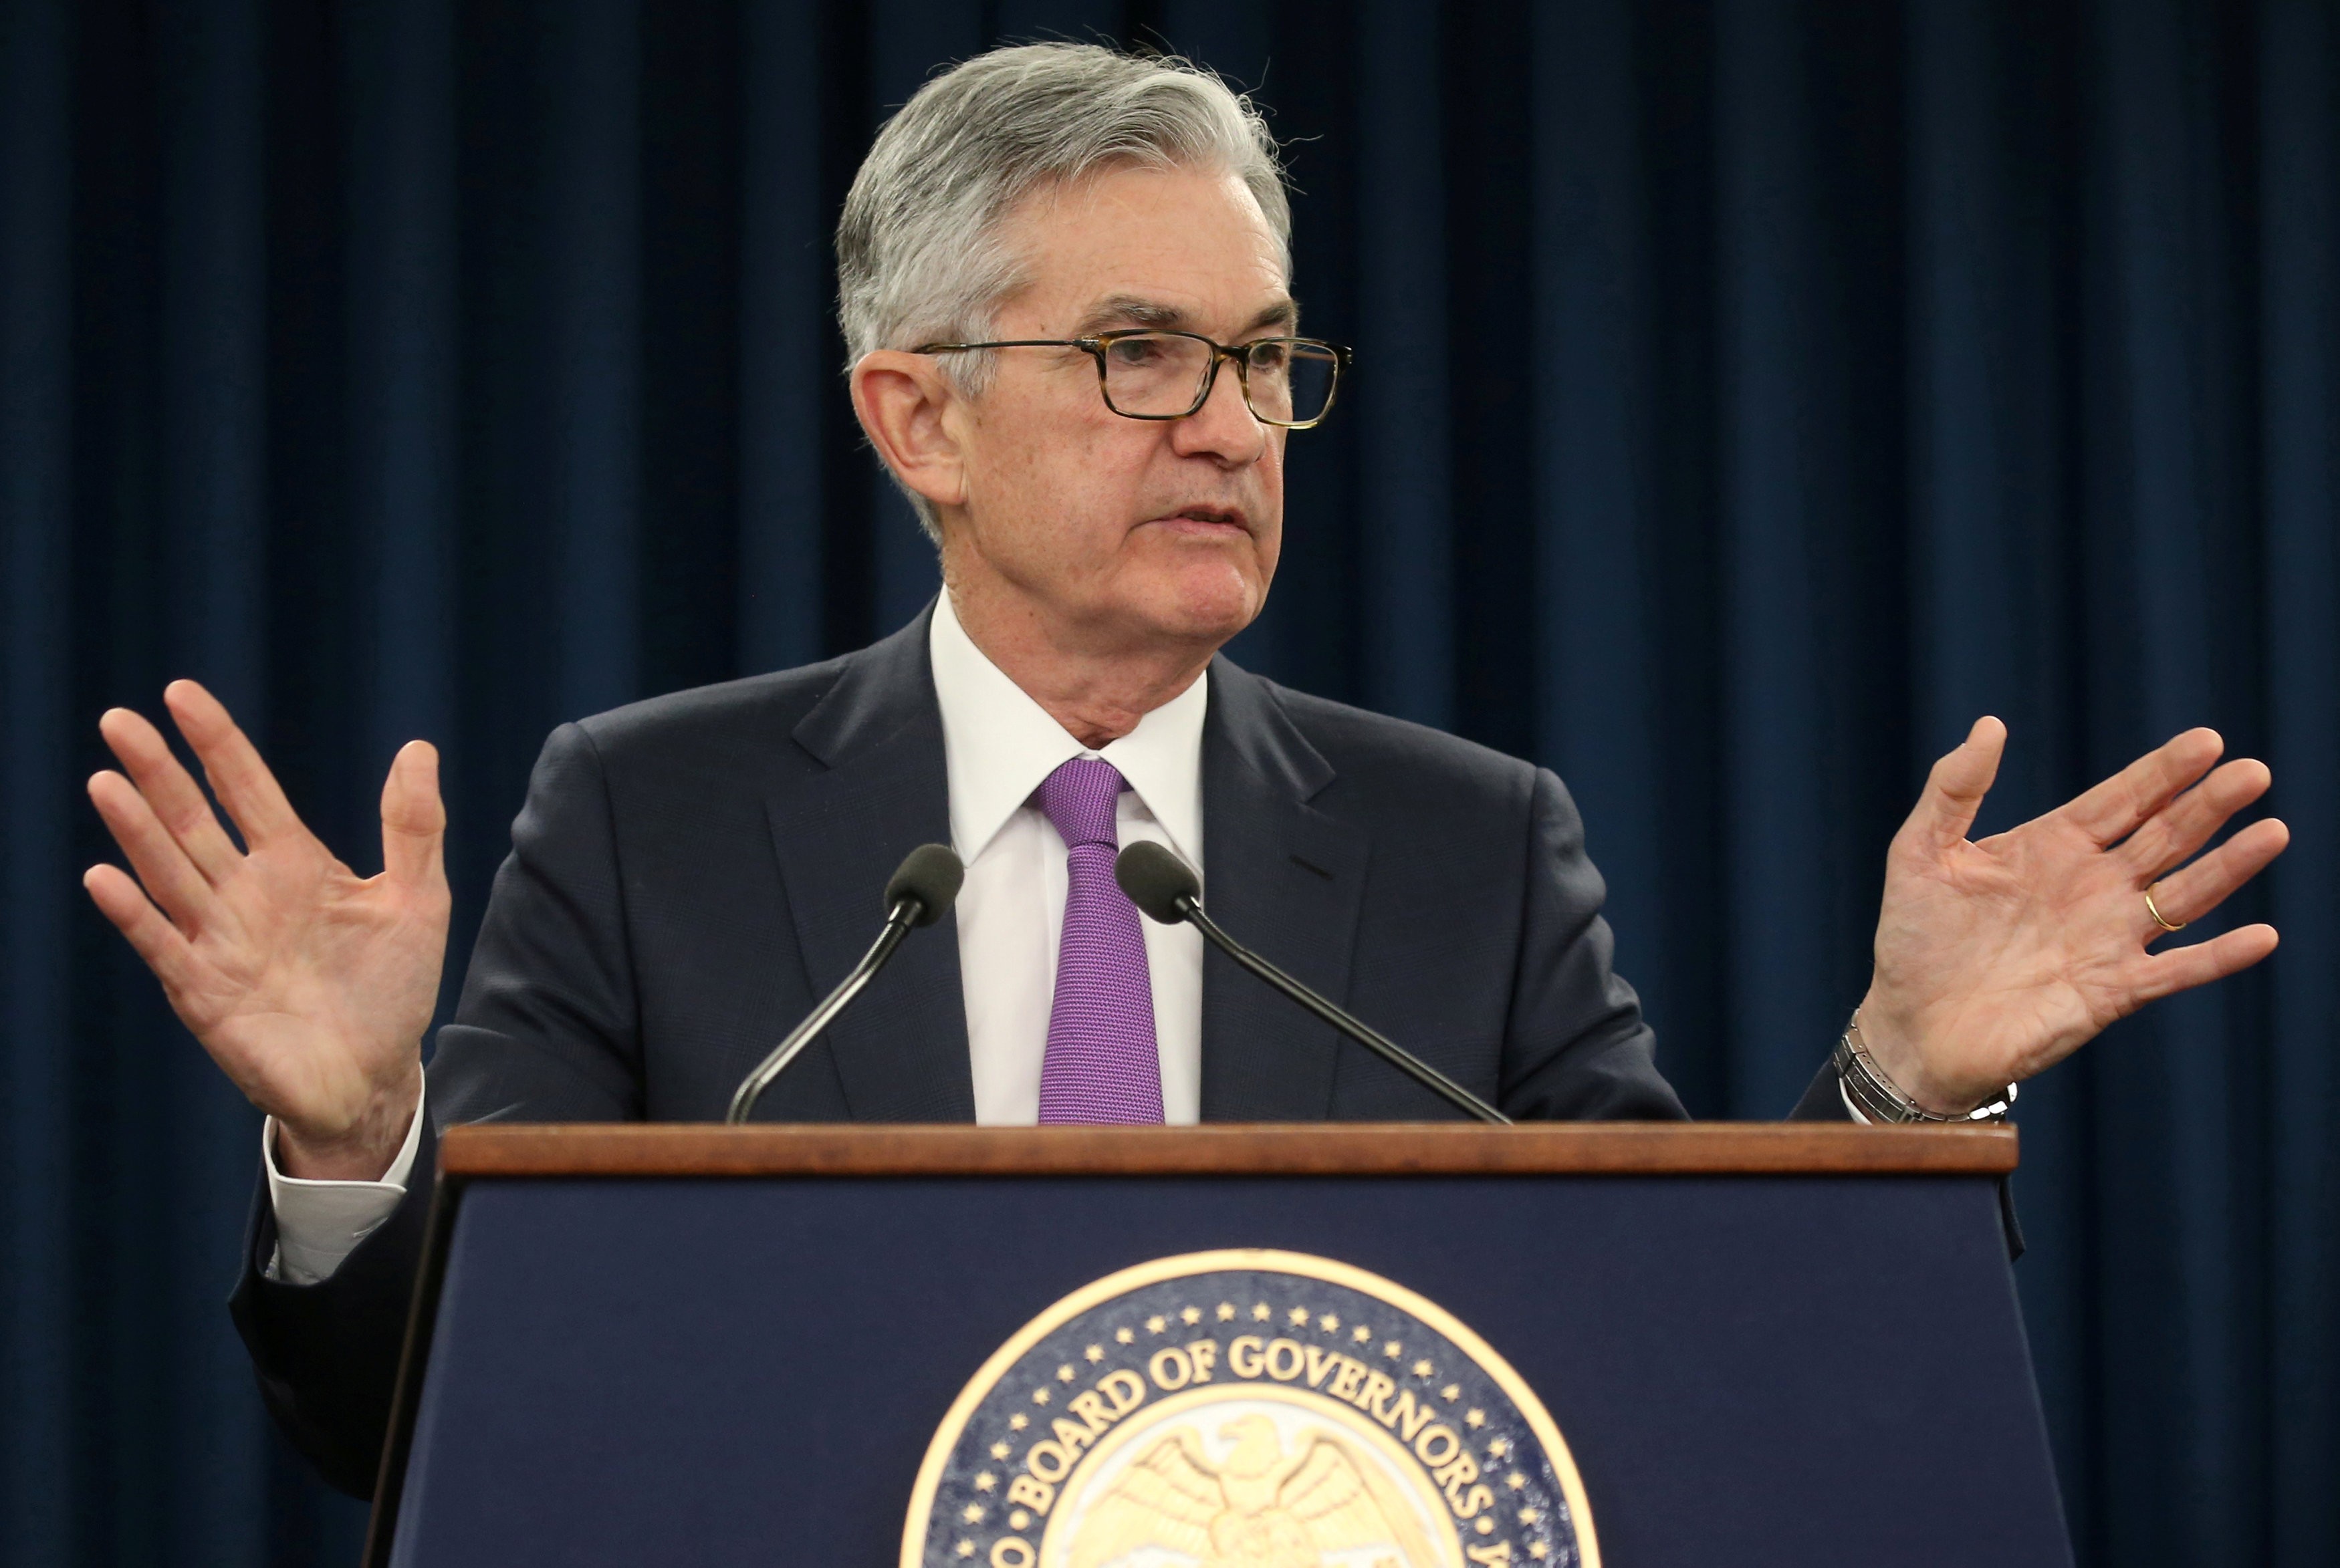 Federal Reserve chairman Jerome Powell holds a press conference in Washington on January 30 following a two-day policy meeting. Photo: Reuters